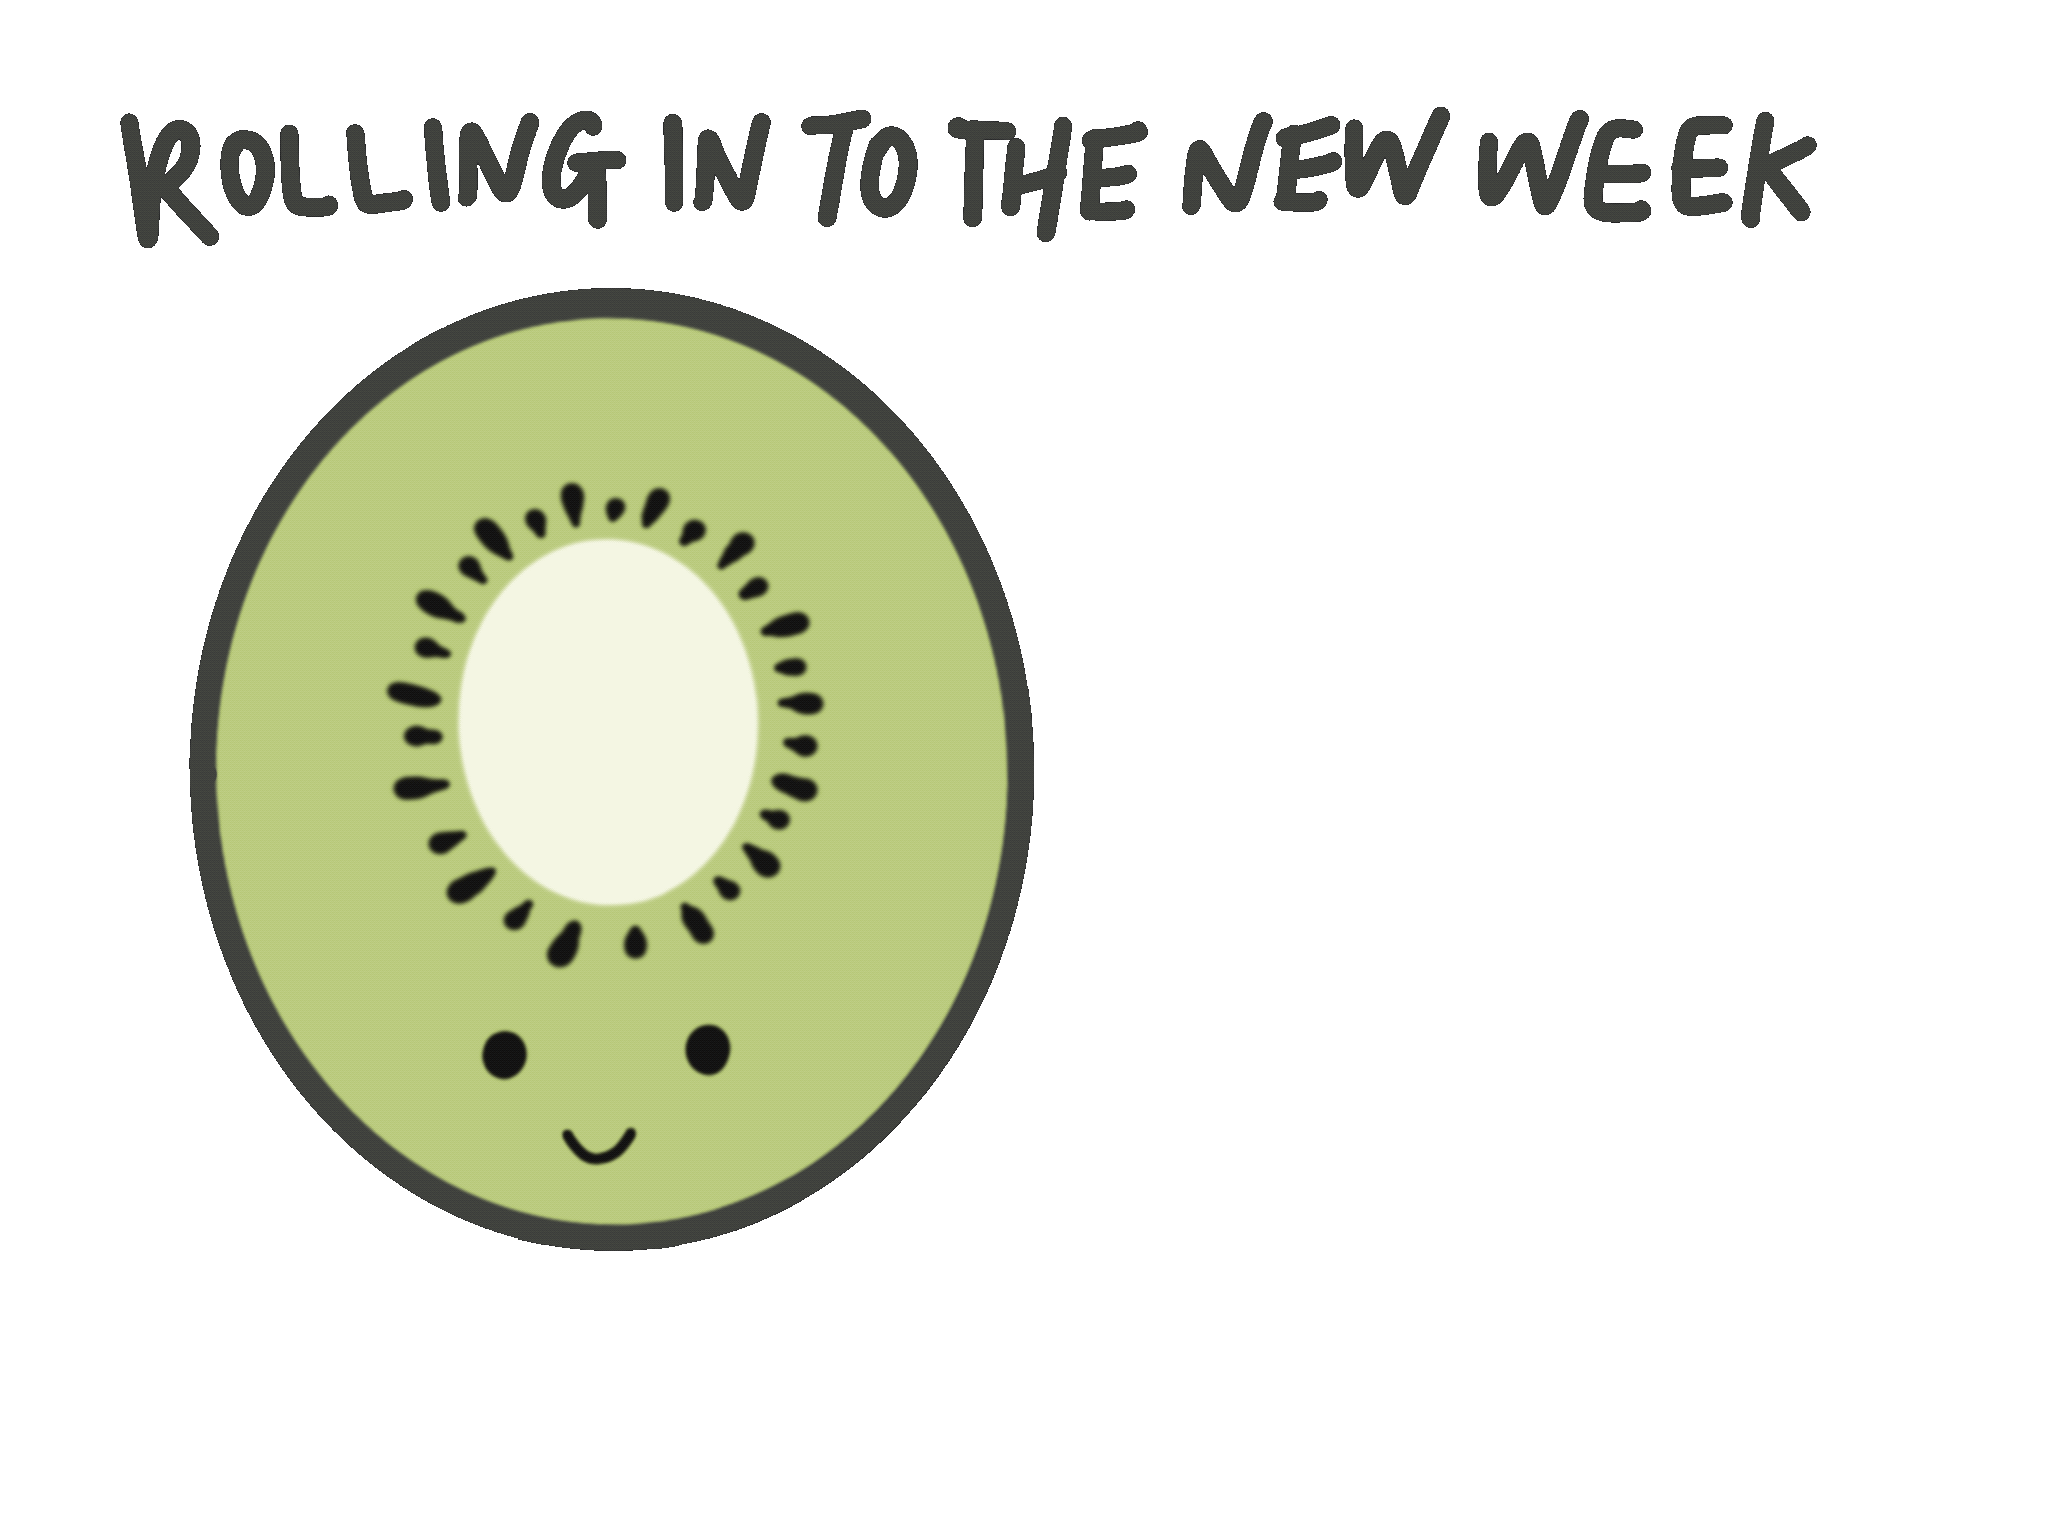 Week Rolling Sticker by The Jomu Co for iOS & Android | GIPHY